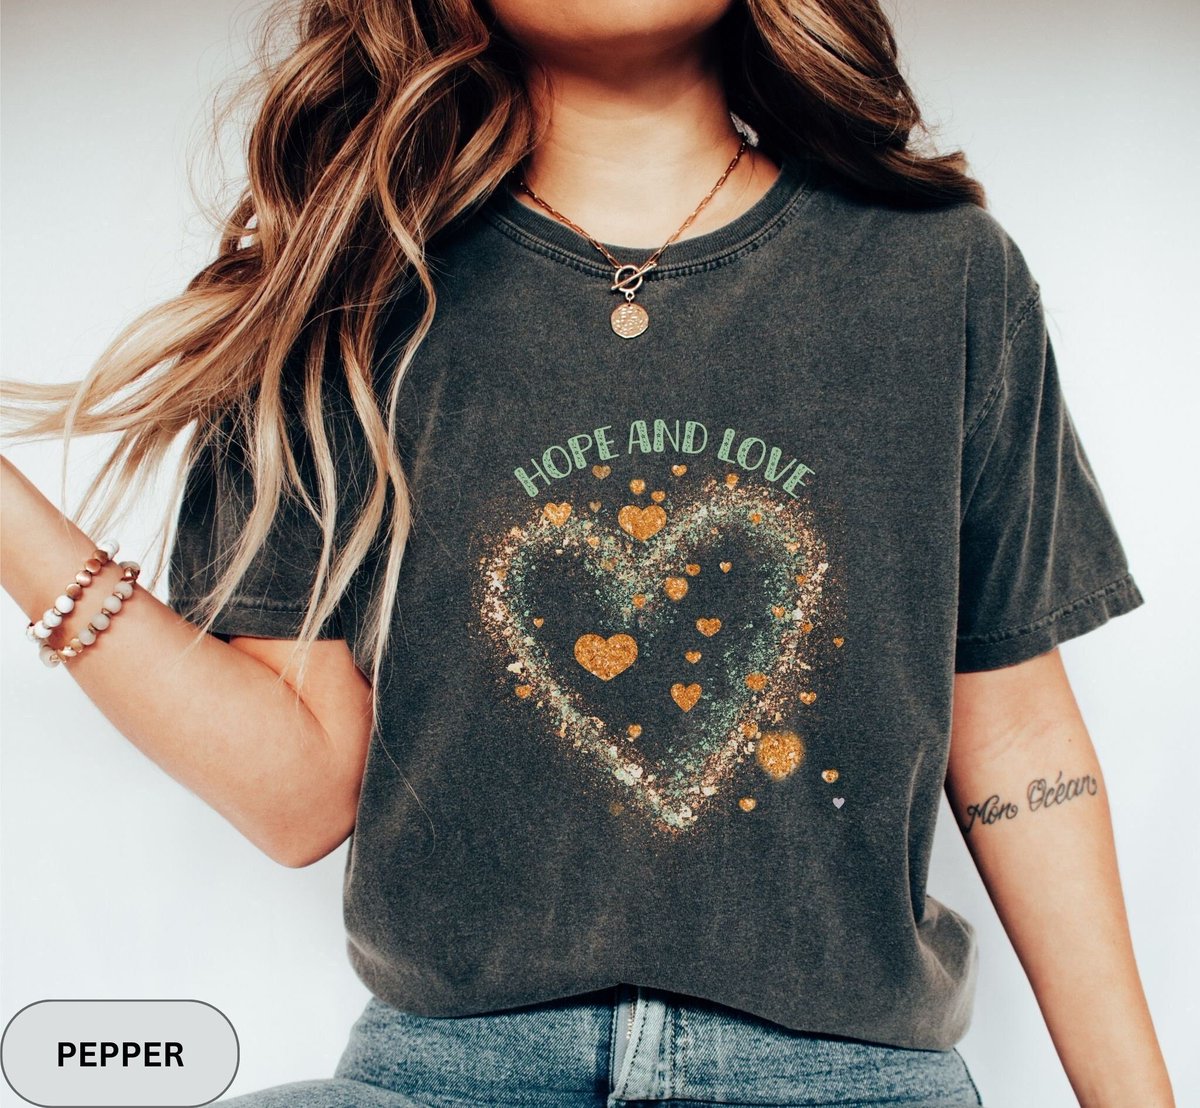 Come and grab this gorgeous “Hope and Love” design! Perfect to give as a gift or buy one for yourself. Come and take a look at the rest of our collection.

#hopeandlove #bohemianvibe #bohoaesthetic #loveandhope #positivevibesonly 

amplifeygiftshop.etsy.com/listing/152818…